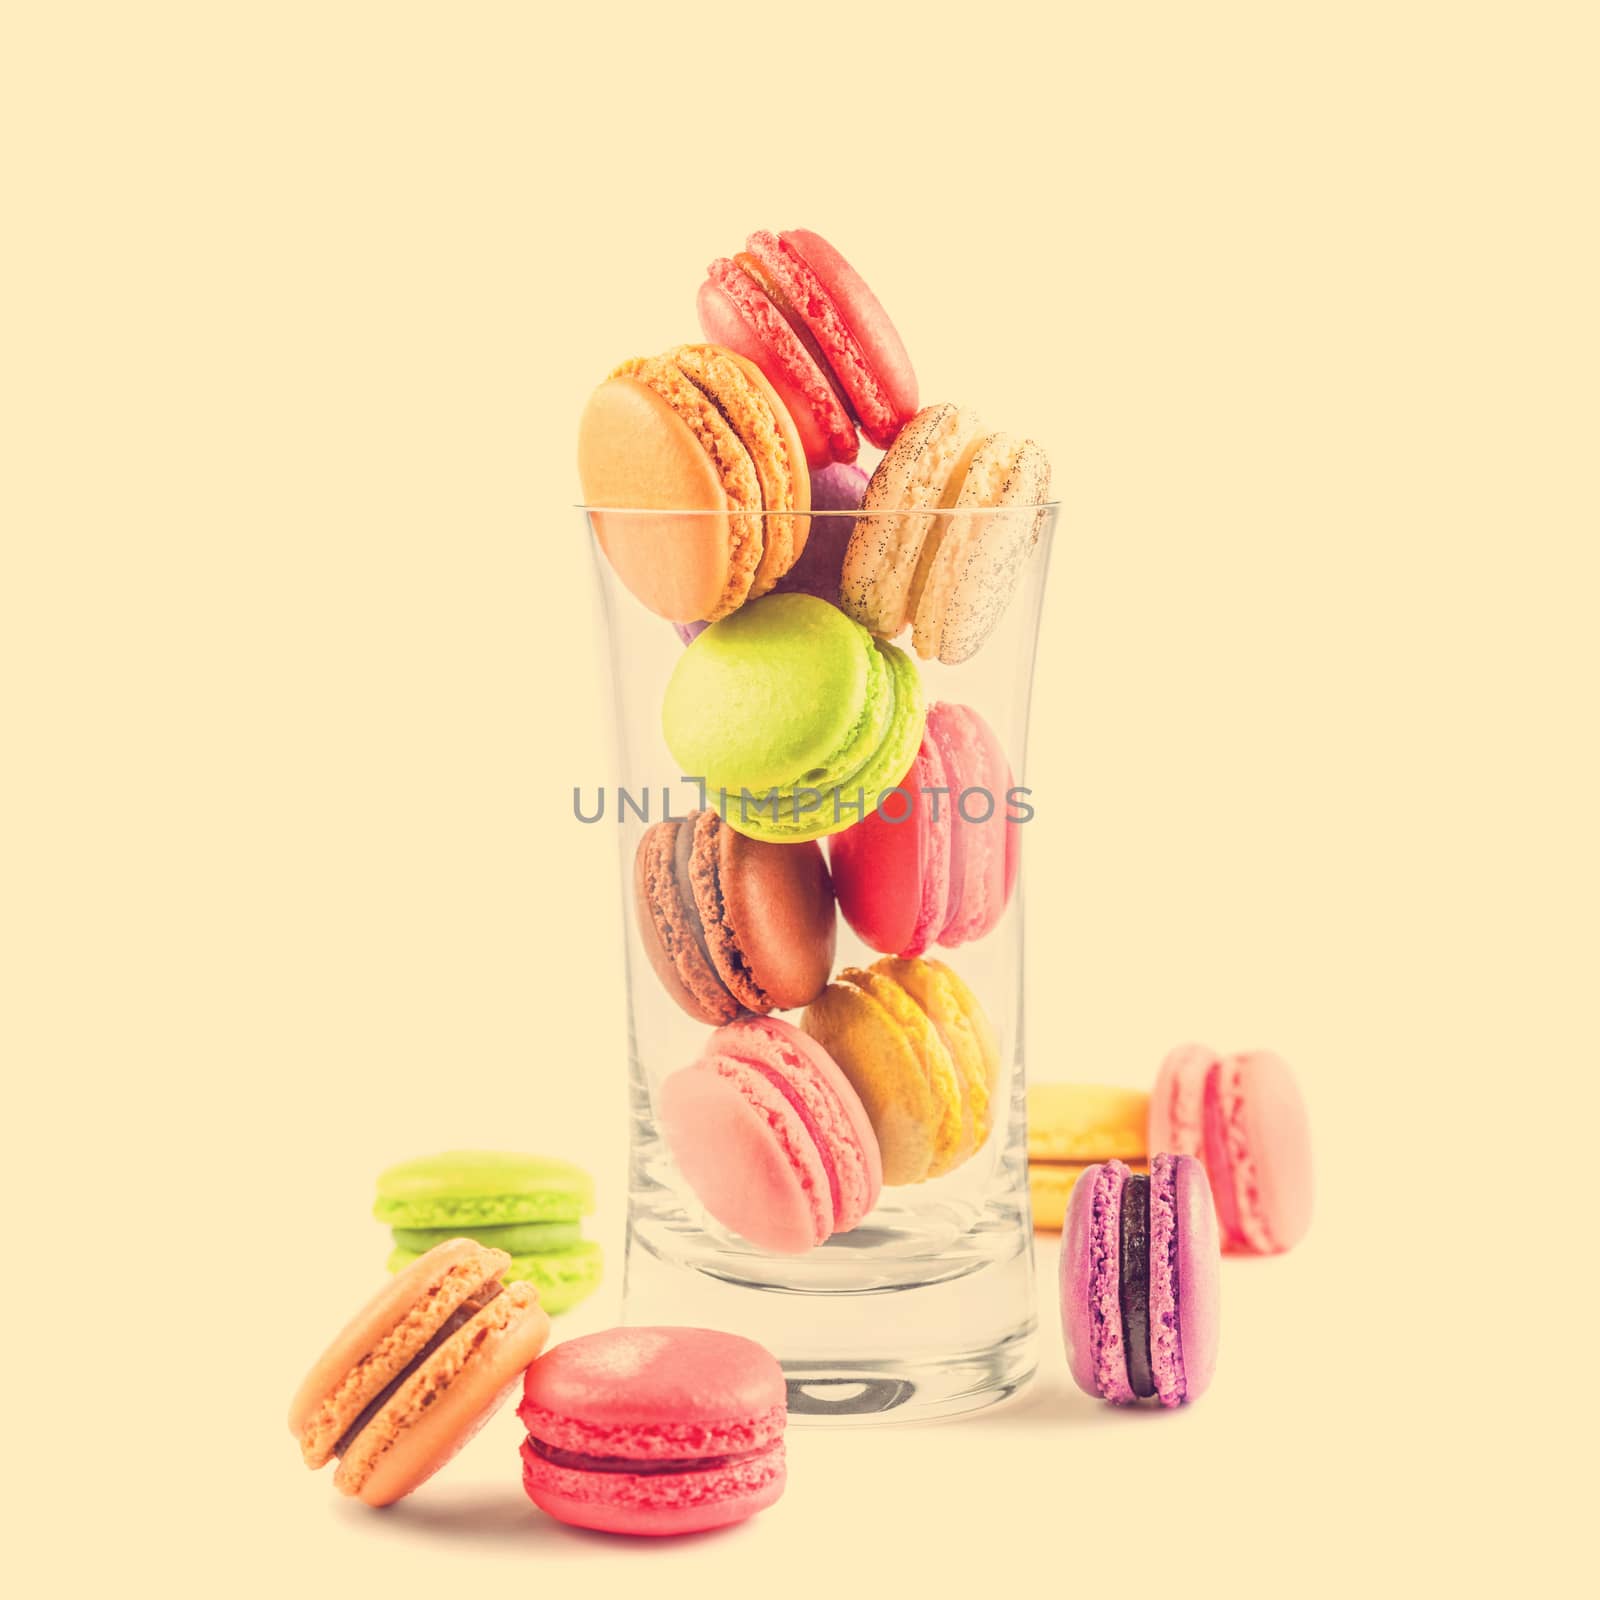 traditional french colorful macarons in a glass on vintage background